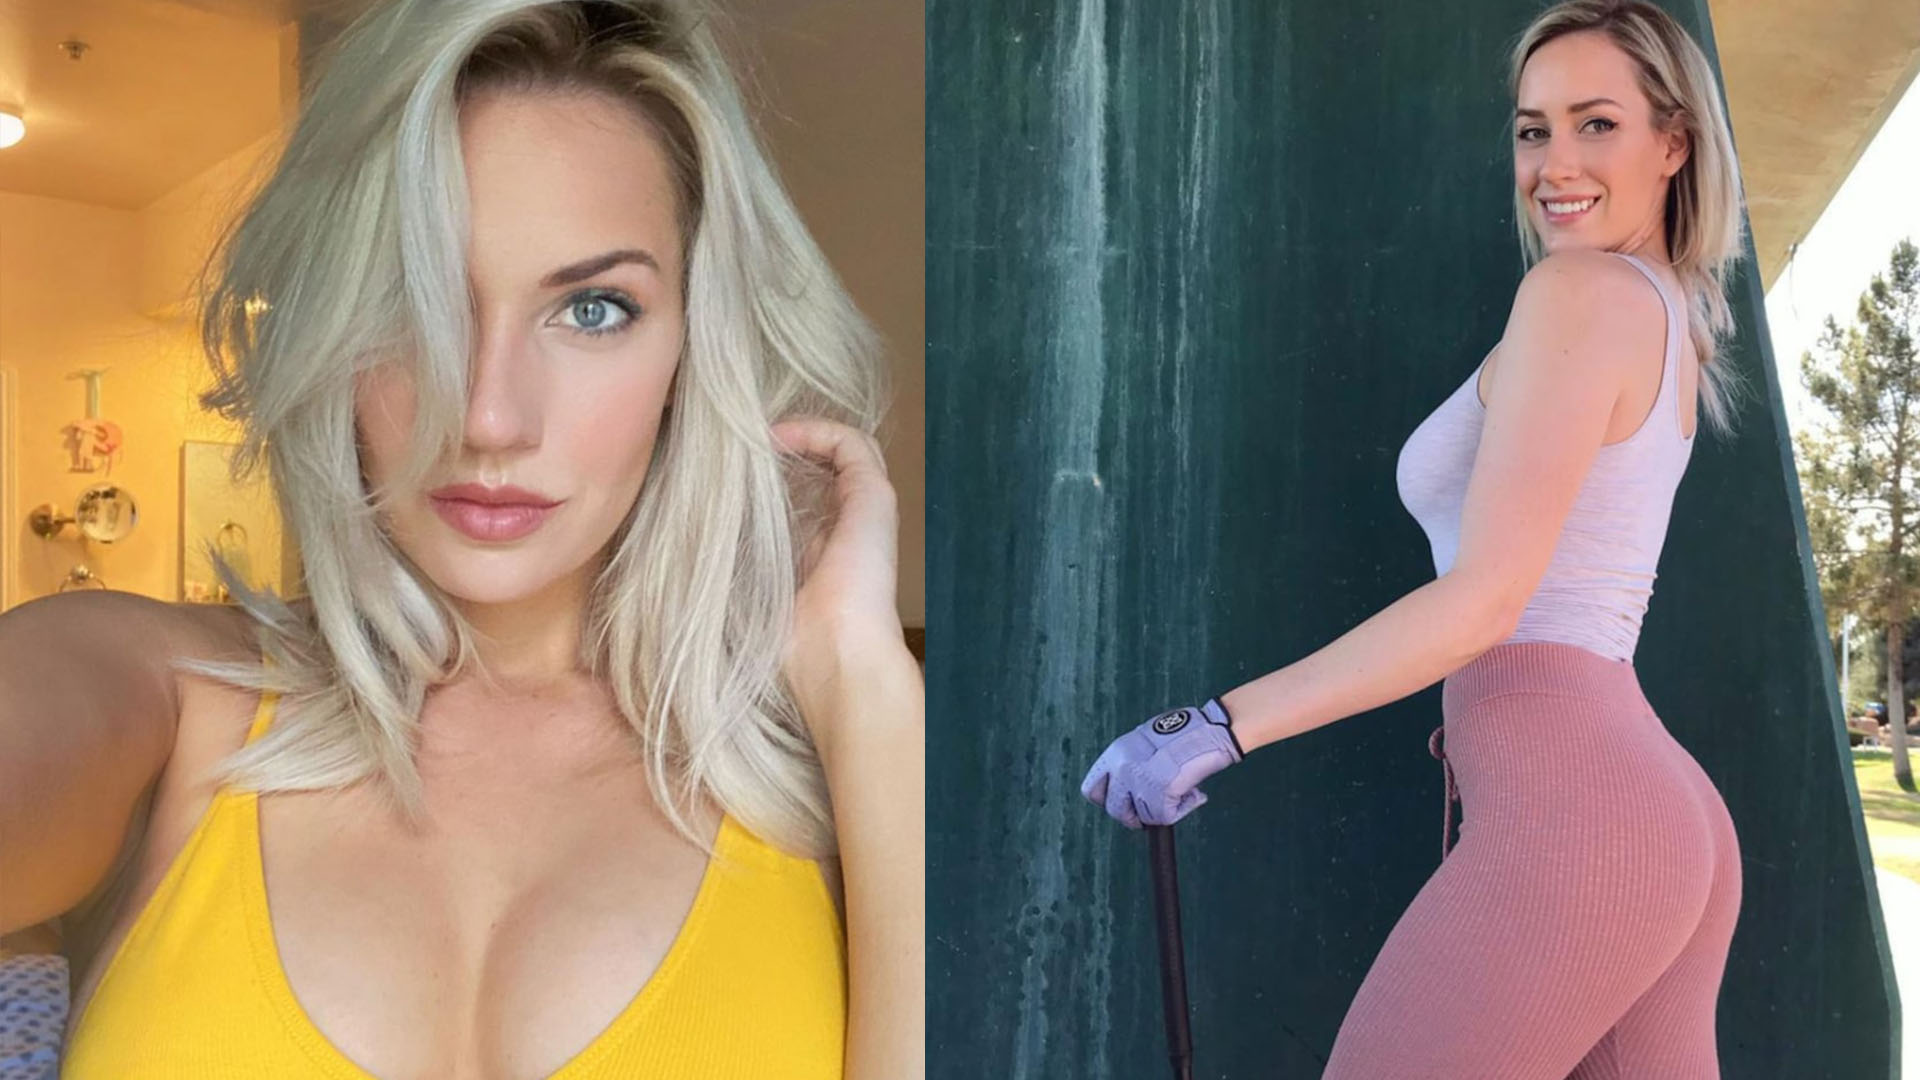 These photos of Paige Spiranac, 'the world's hottest golfer'...